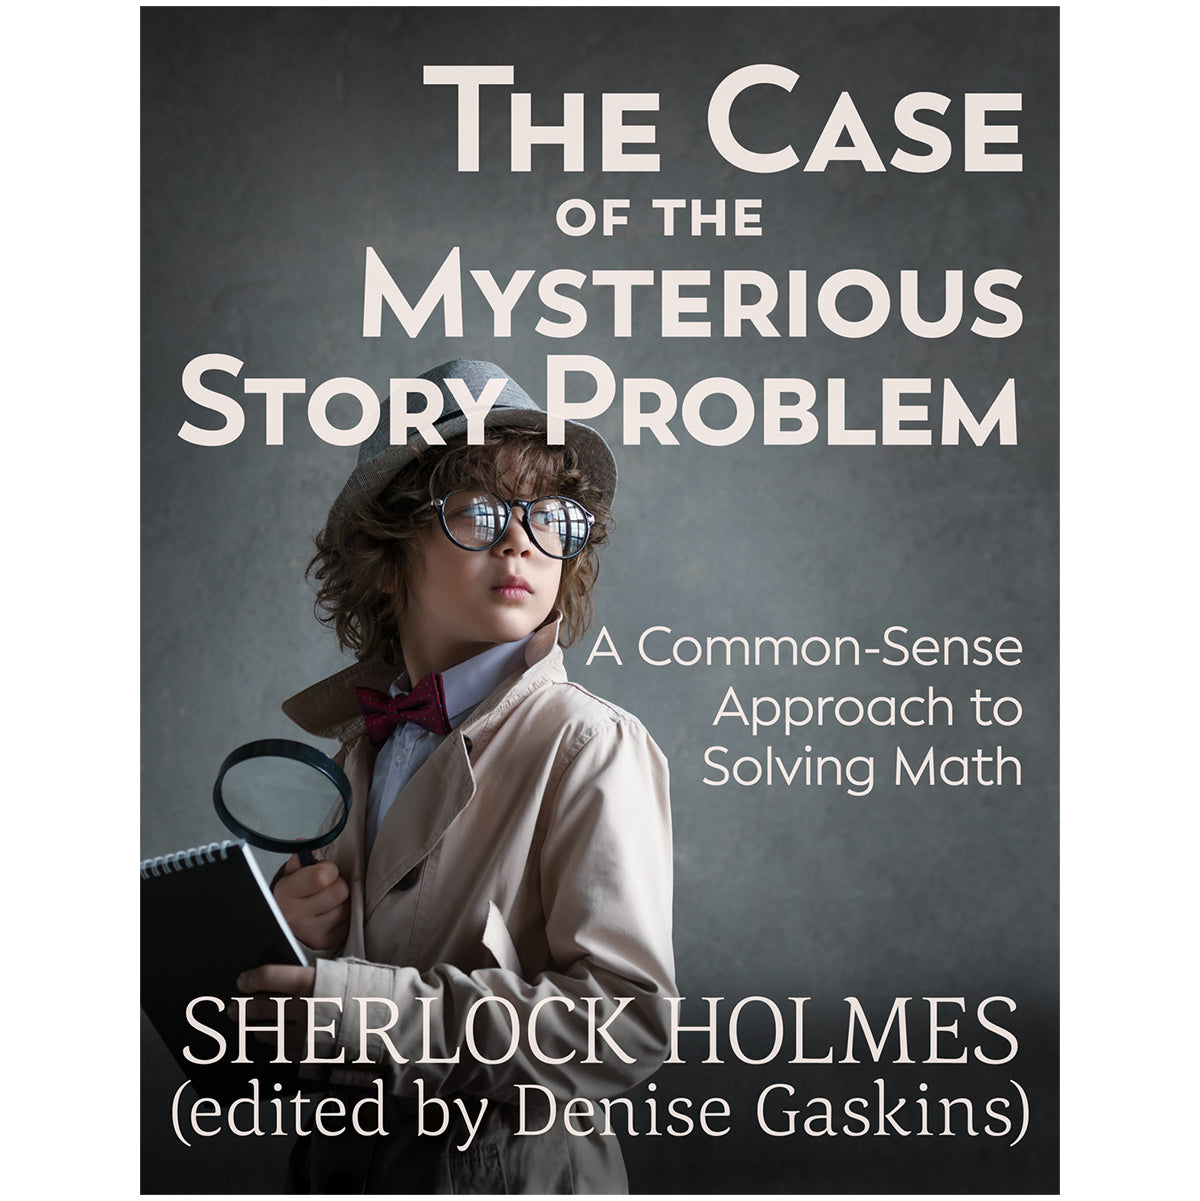 Case of the Mysterious Story Problem printable math activity book by Sherlock Holmes